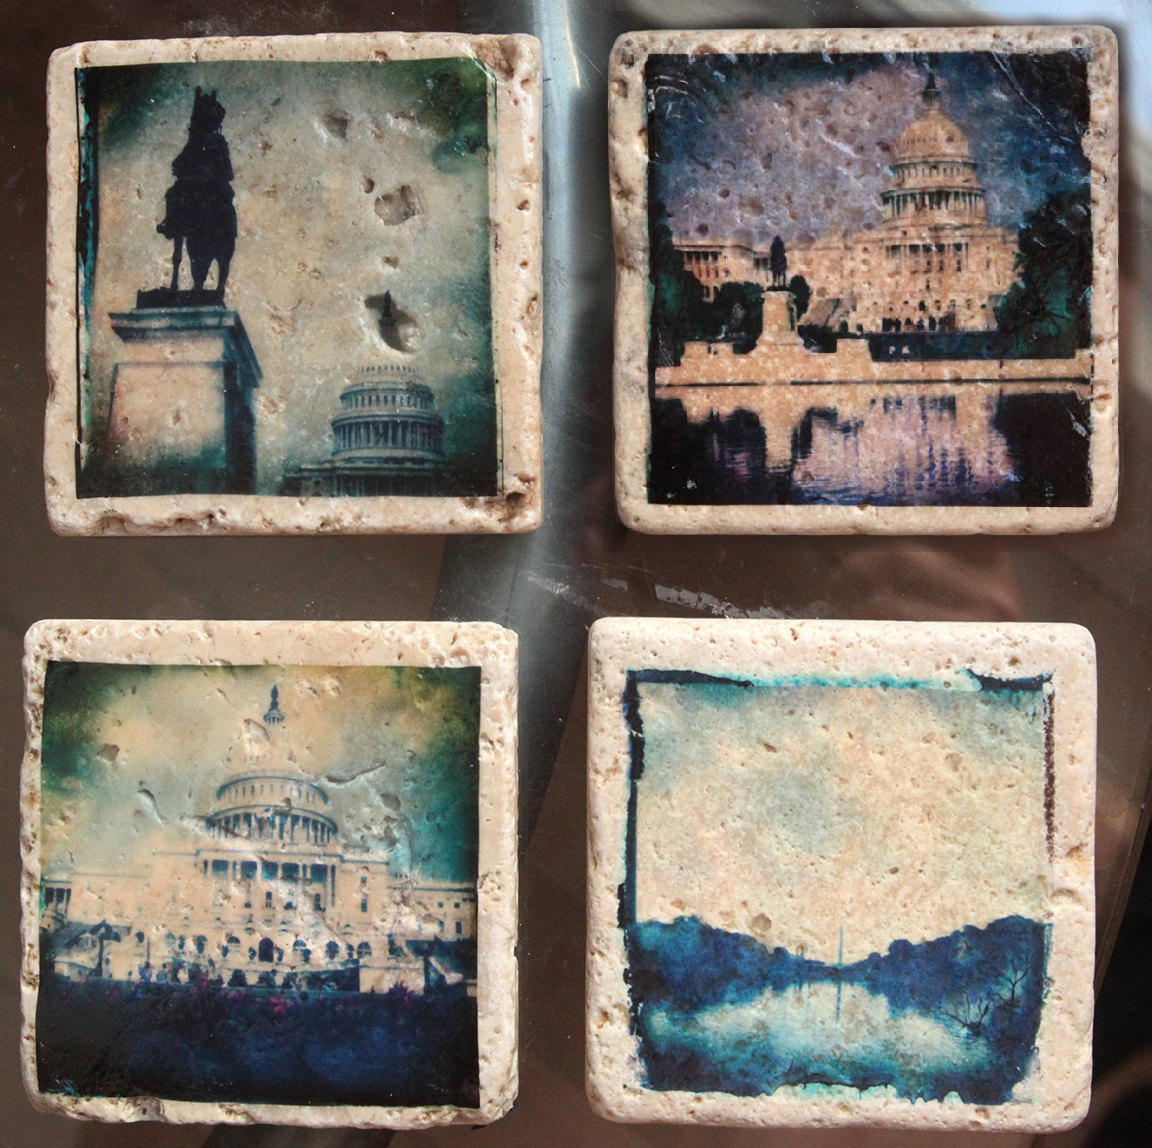 A stunning set of four 4x4 Glass Coasters or wall art, taken in Washington DC, that are sure to be a conversation piece on any coffee table.